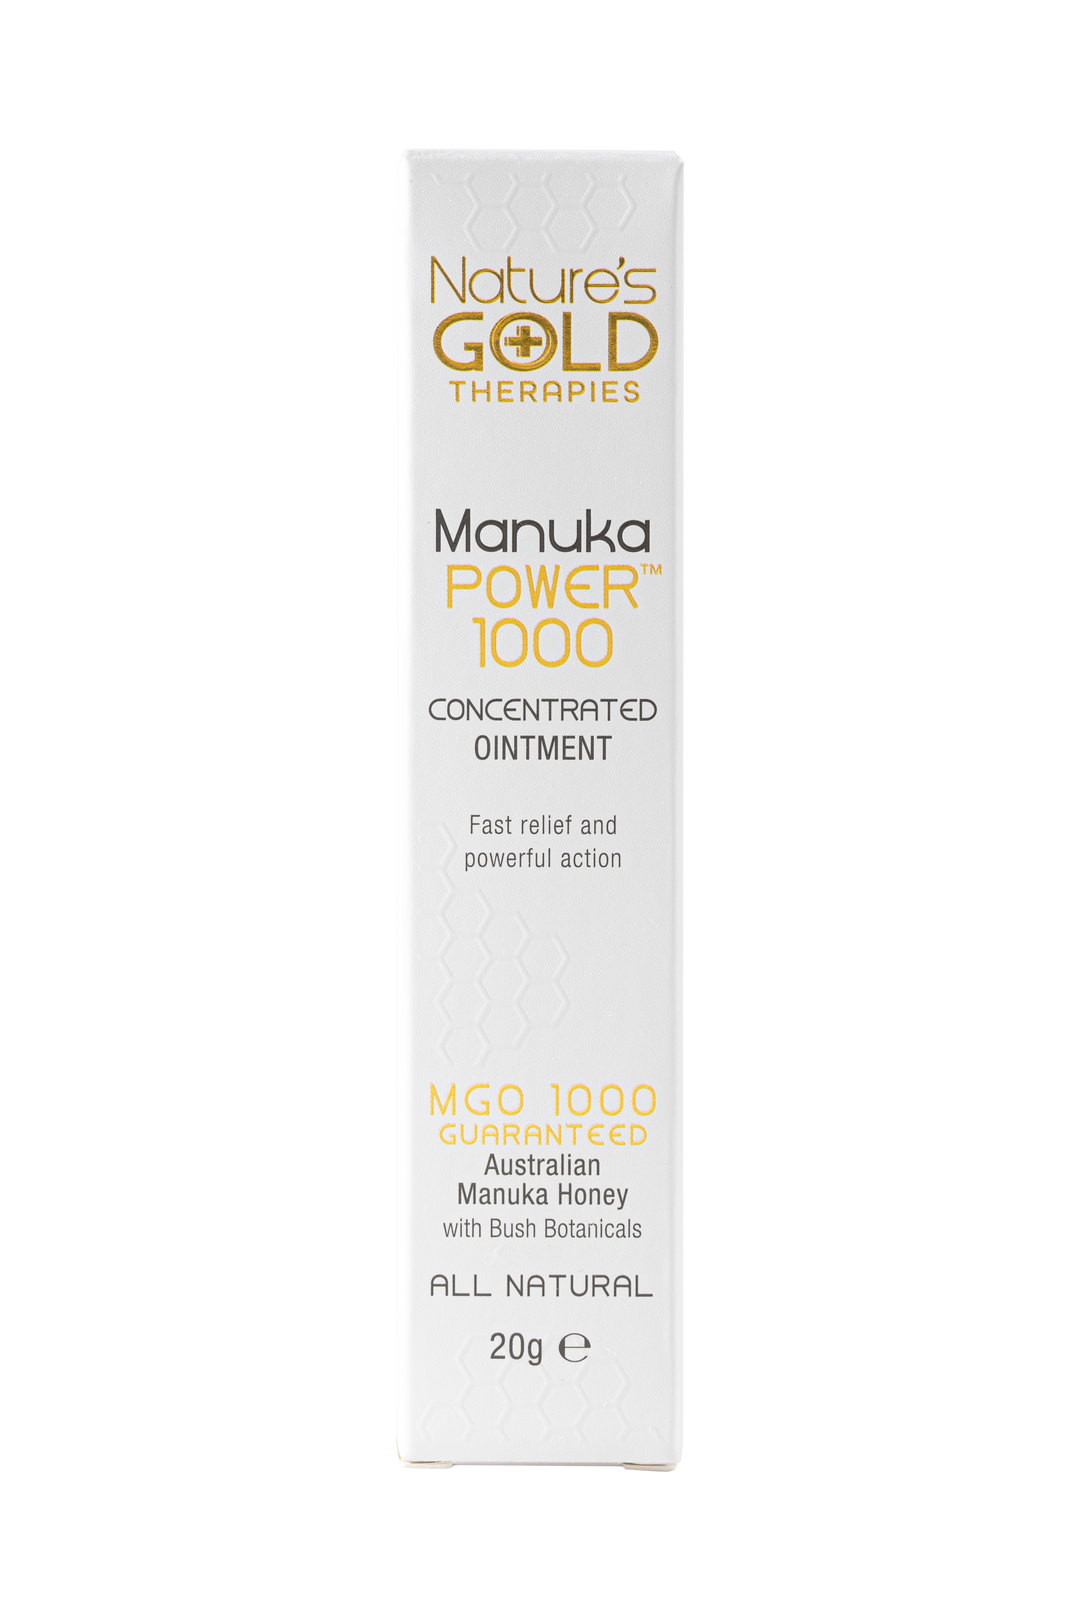 MGO 1000 Australian Manuka Honey concentrated ointment 